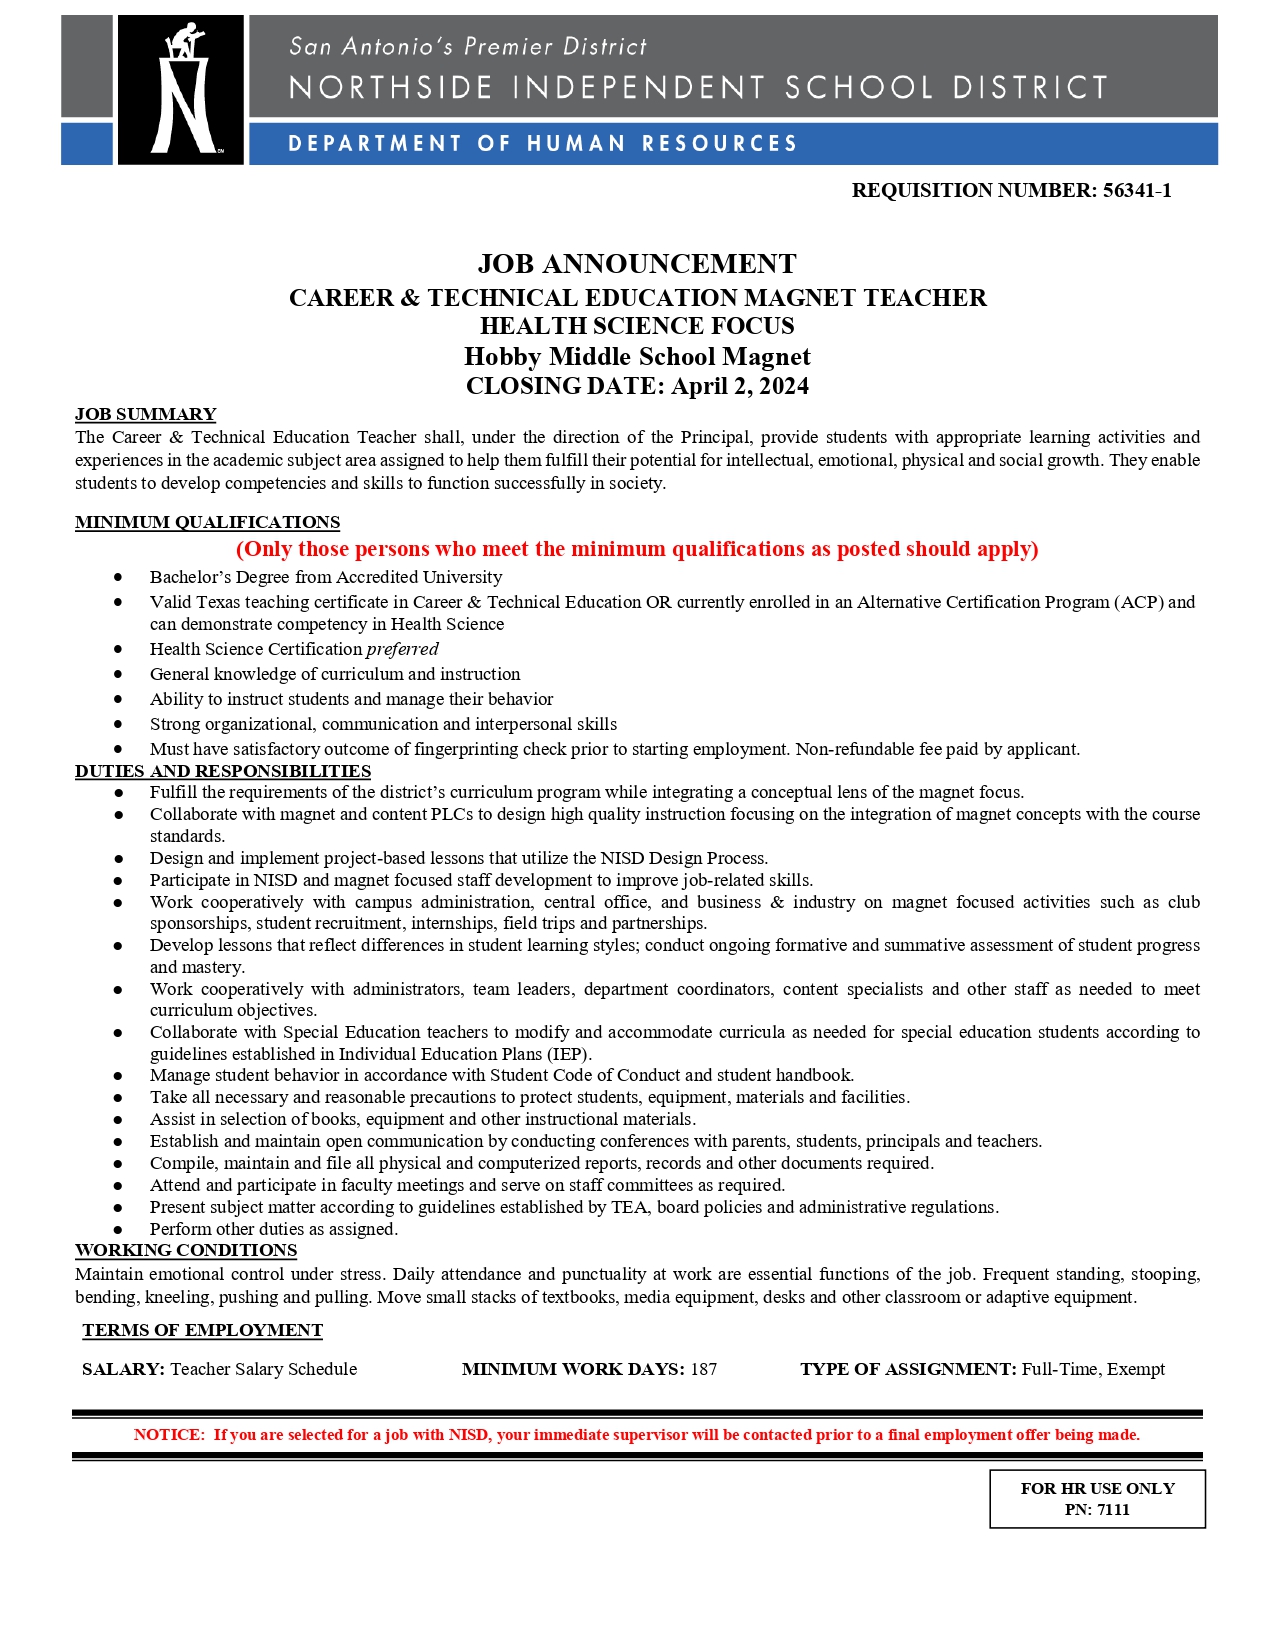 CTE with health focused magnet job application position for Hobby MS